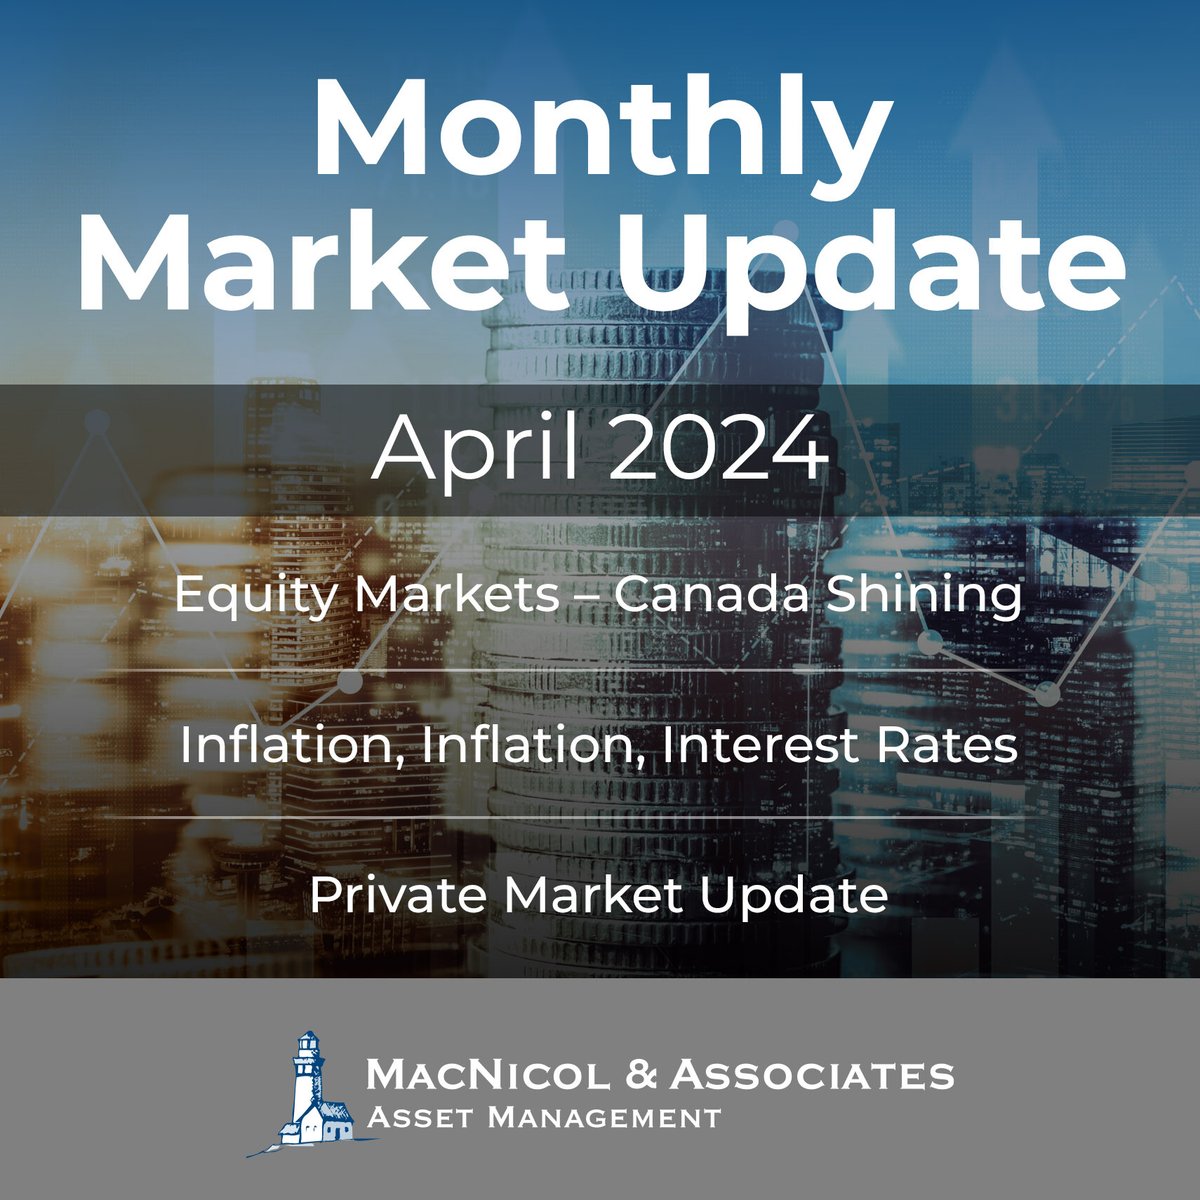 Our Monthly Market Update is now available. This month we discuss: #equitymarkets #markets #investing #privateequity #alternativeassets #financialplanning #advisors #financialadvisors

$spx $gold $gdx $ndx $tsx 

Watch it here: macnicolasset.com/maam-monthly-m…